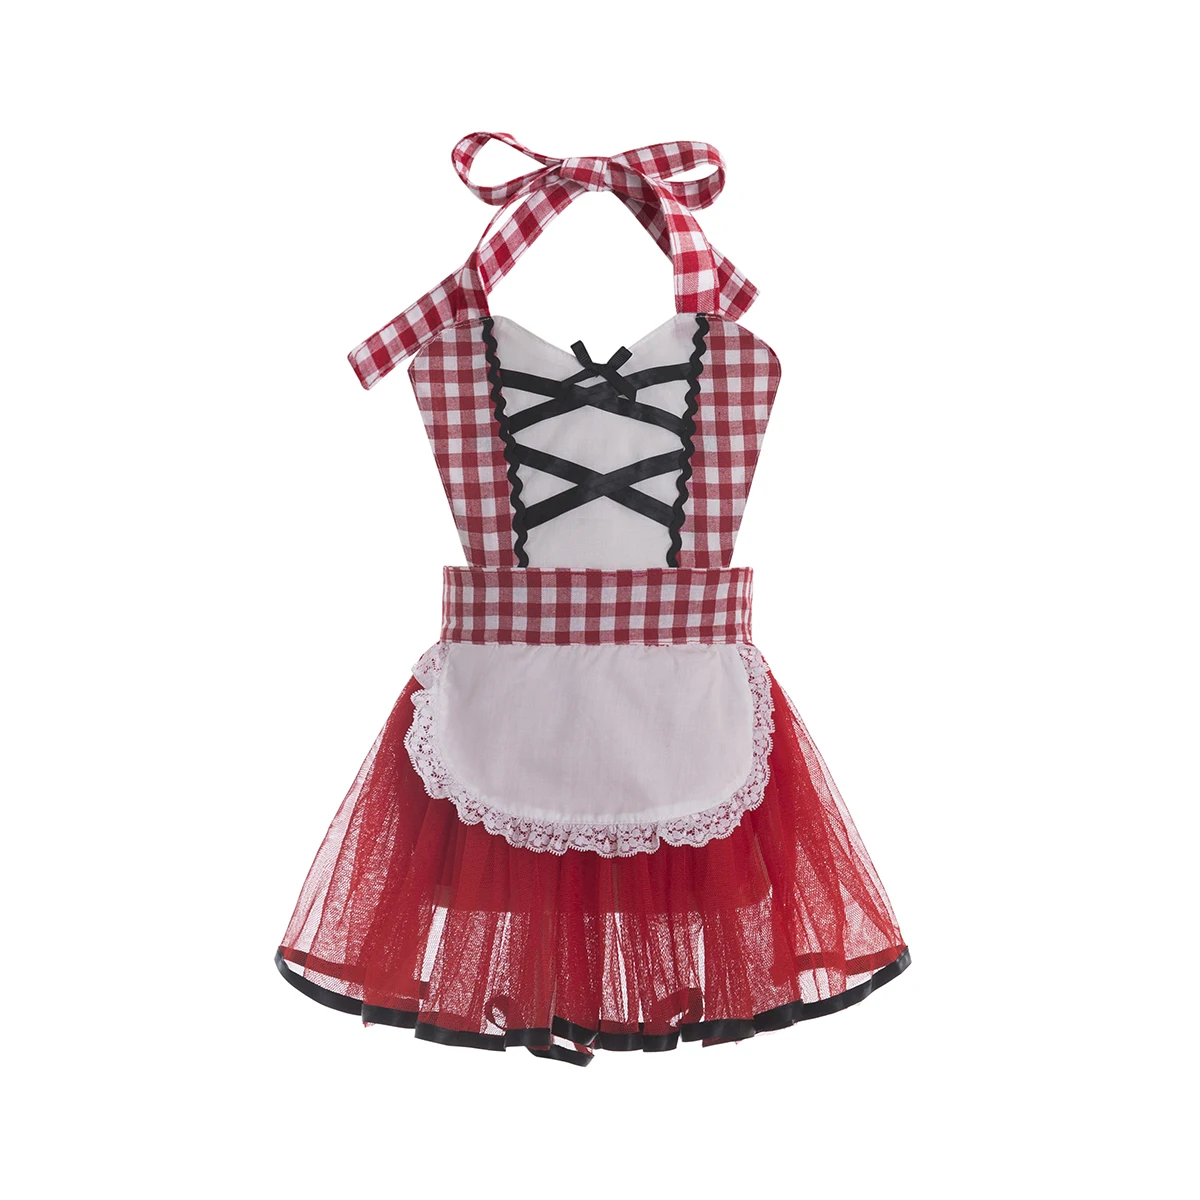 

Newborn Toddler Baby Girl Halter Tutu Romper Dress Red Cloak Little Red Riding Hood Outfits Party Cosplay Costume 0-24M